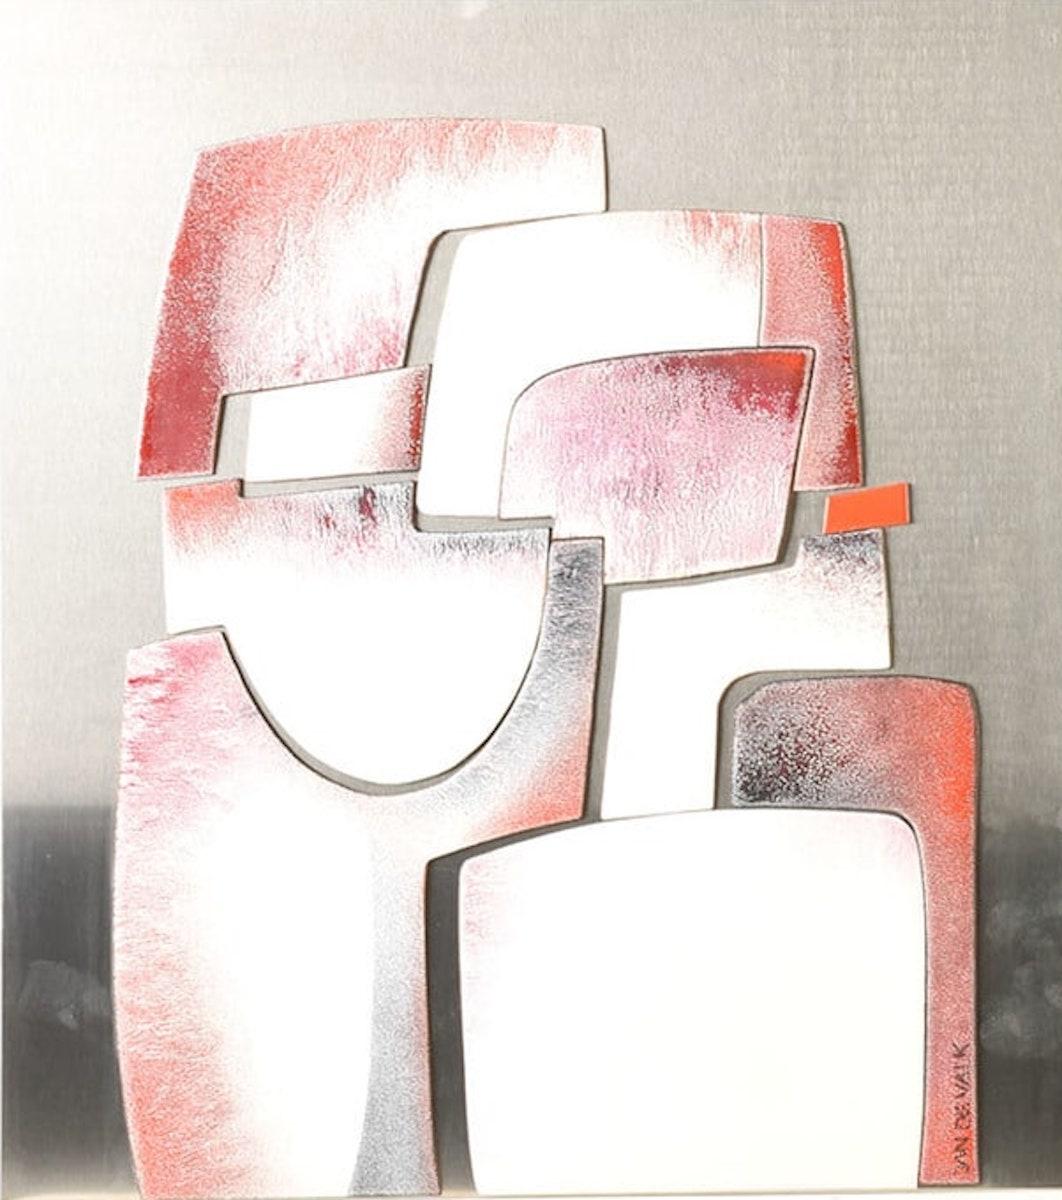 Modernist enamel plaque with an abstract design in white and reds on a stainless steel background. This wall hanging sculpture is signed on front and labeled verso. The composition of rounded shapes, visually stacked on top of each other, are in